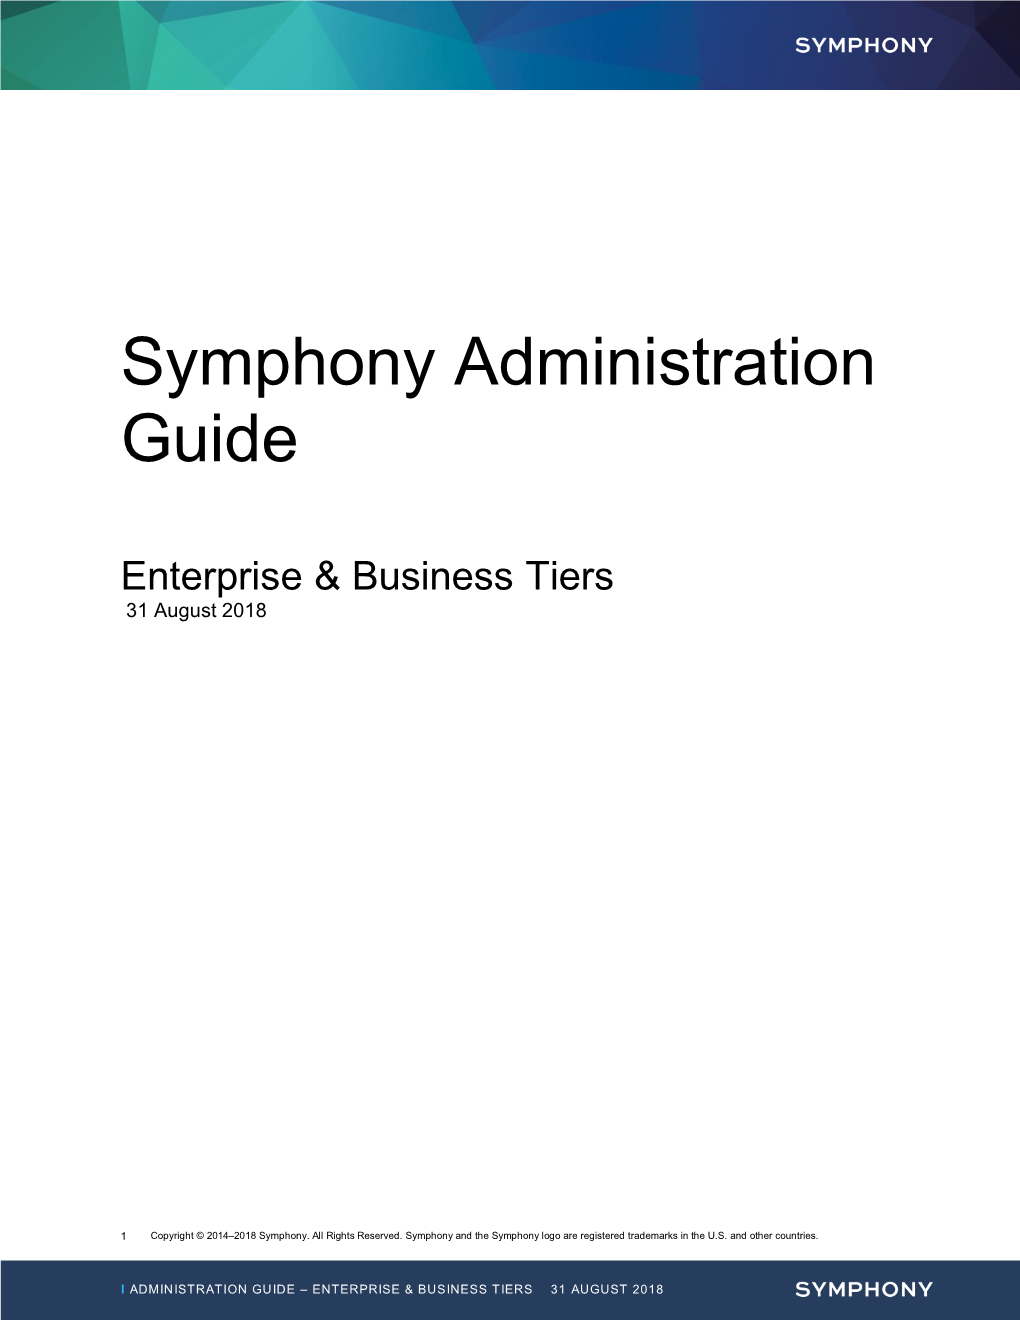 Symphony Administration Guide